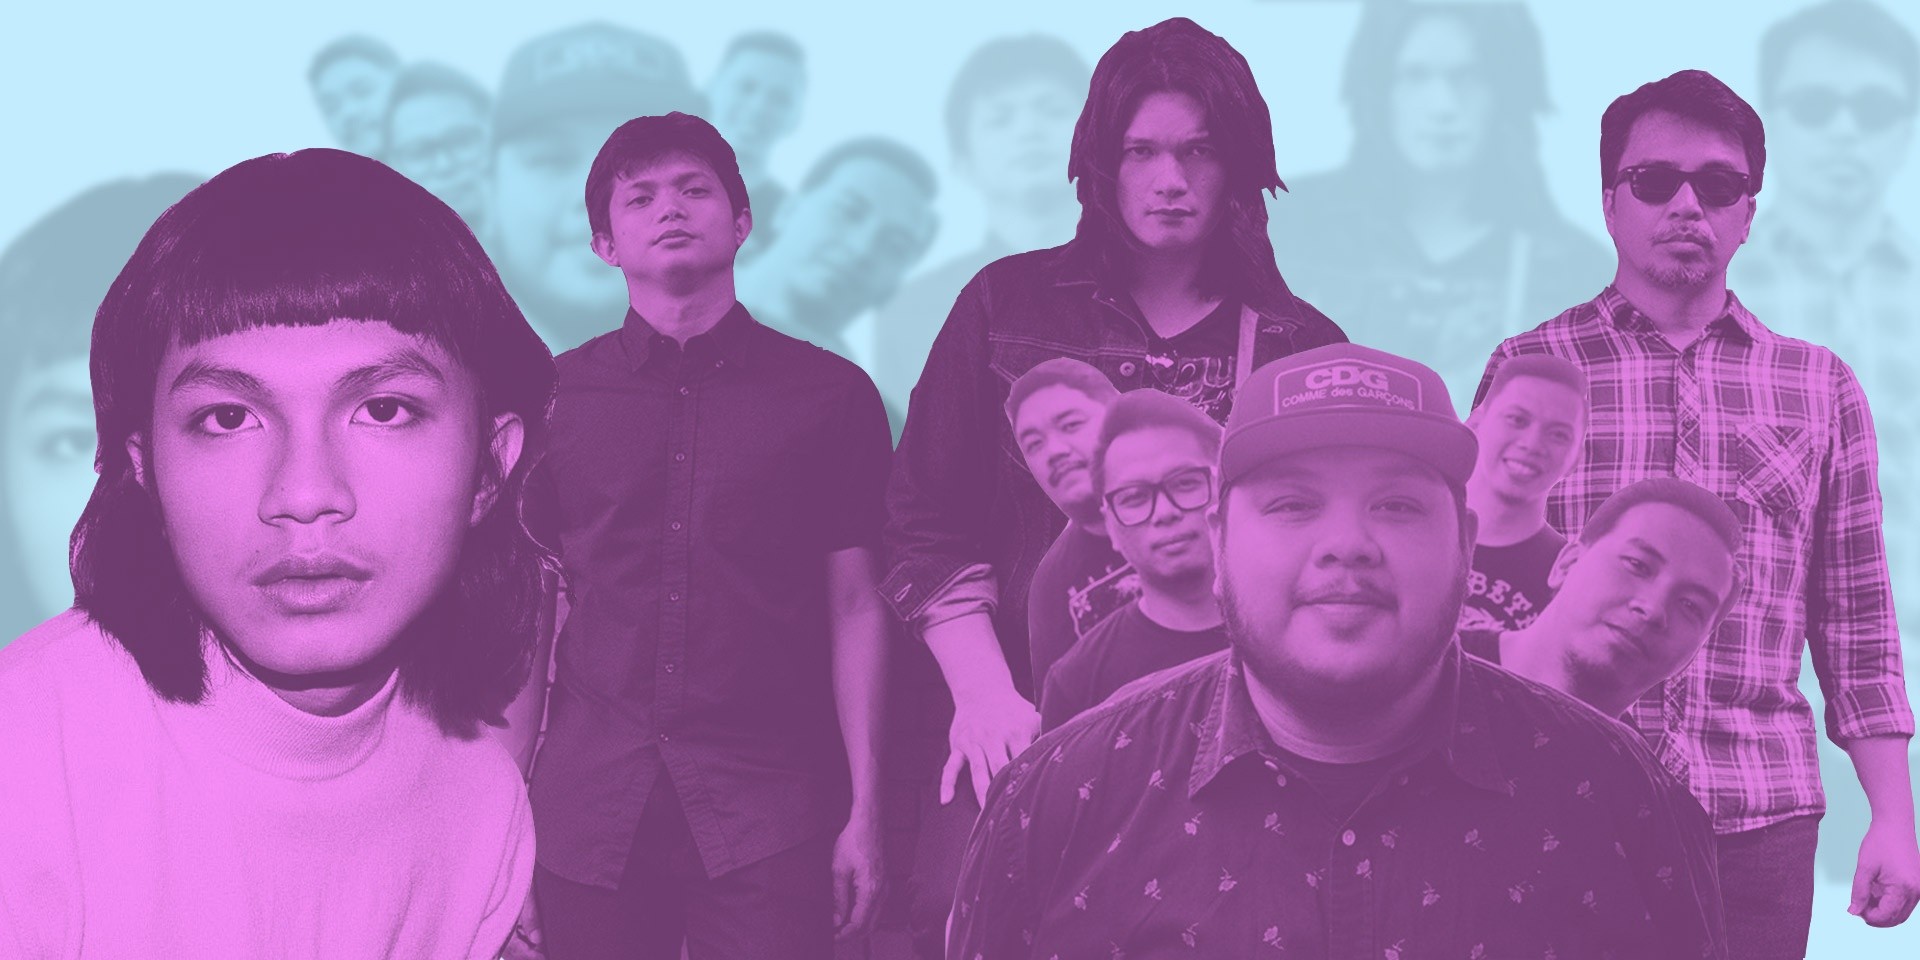 Unique, Hilera, Mayonnaise, and more to perform at Valenzuela Music Festival 2019